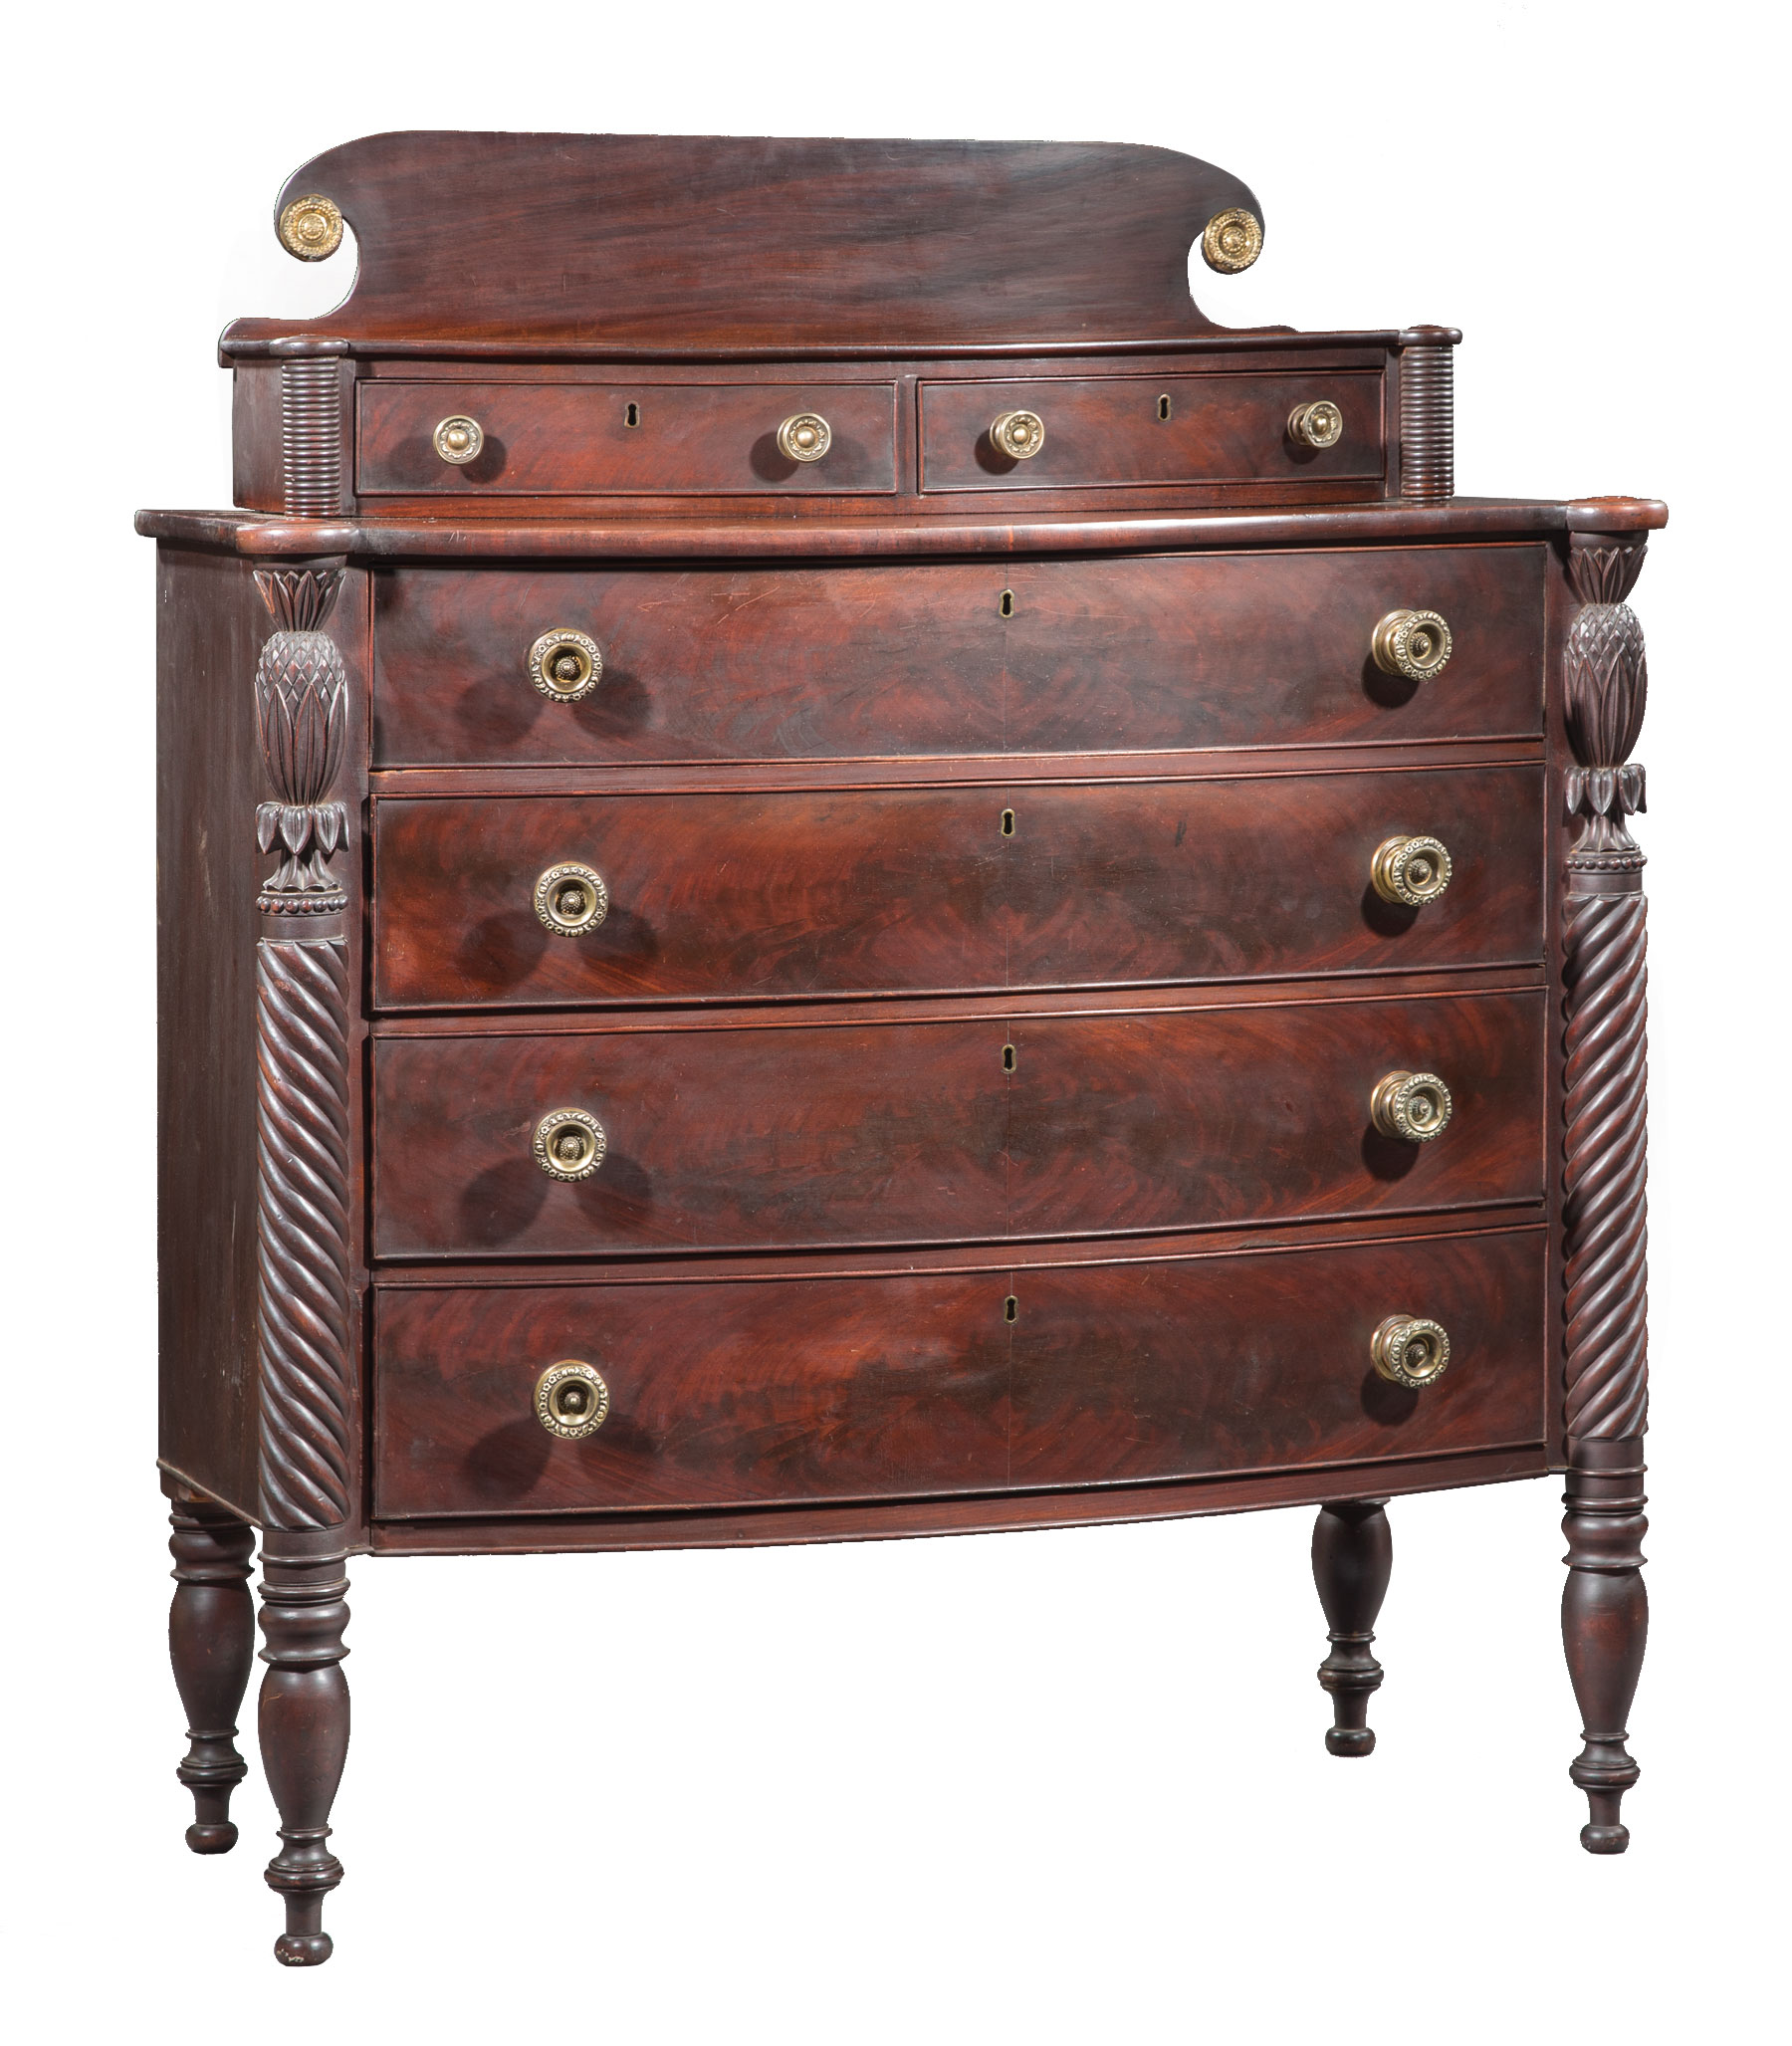 Federal Carved Mahogany Gentlemen's Chest of Drawers , early 19th c., Salem, superstructure fitted